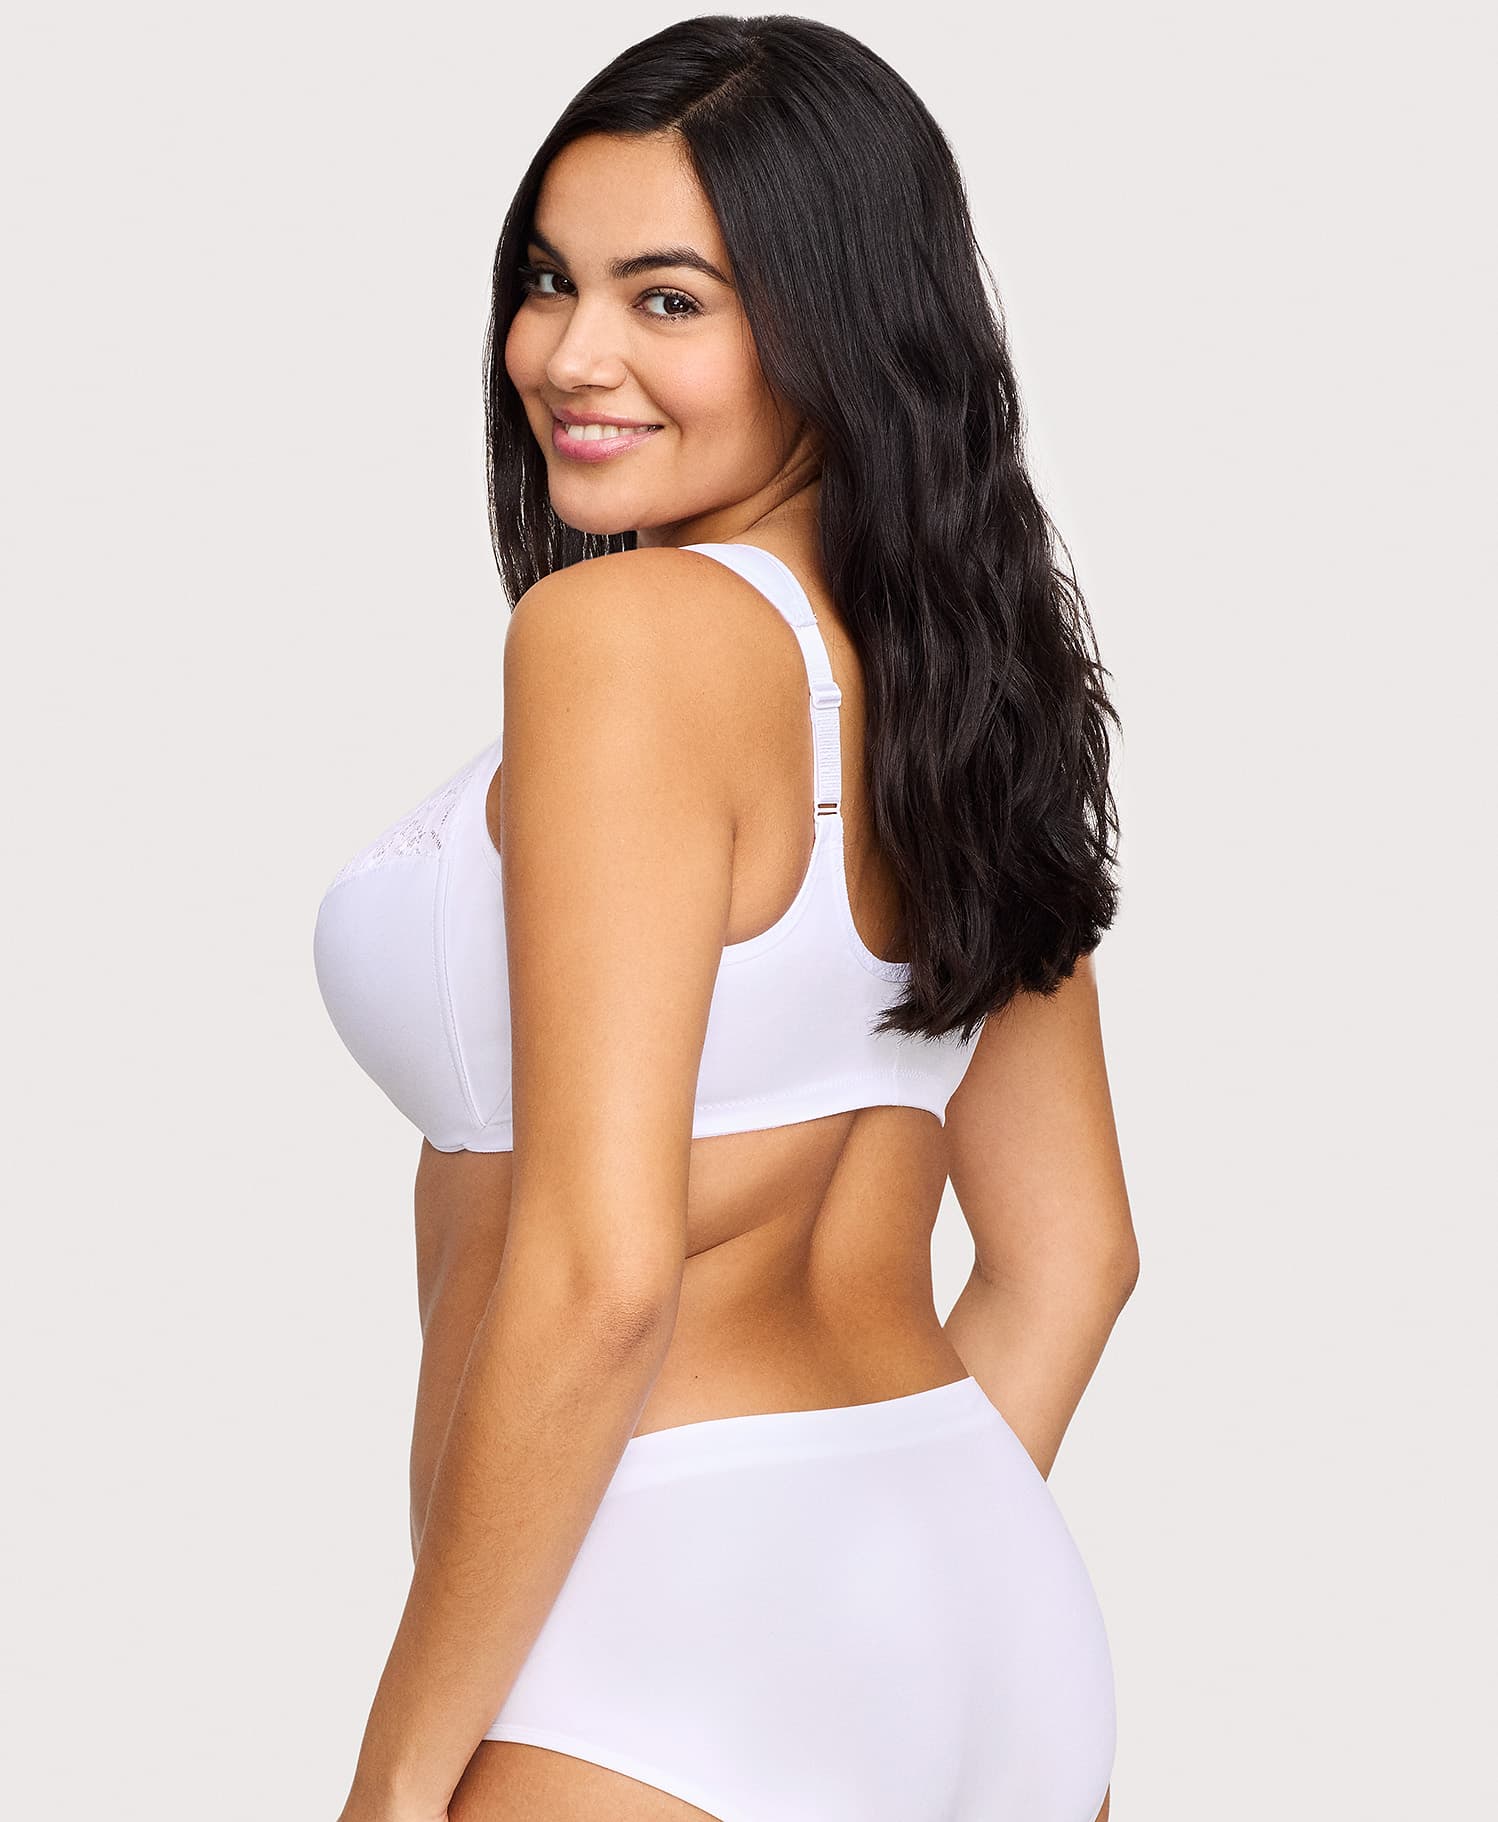 BraWorld - White bras are trending!! Available in 80+